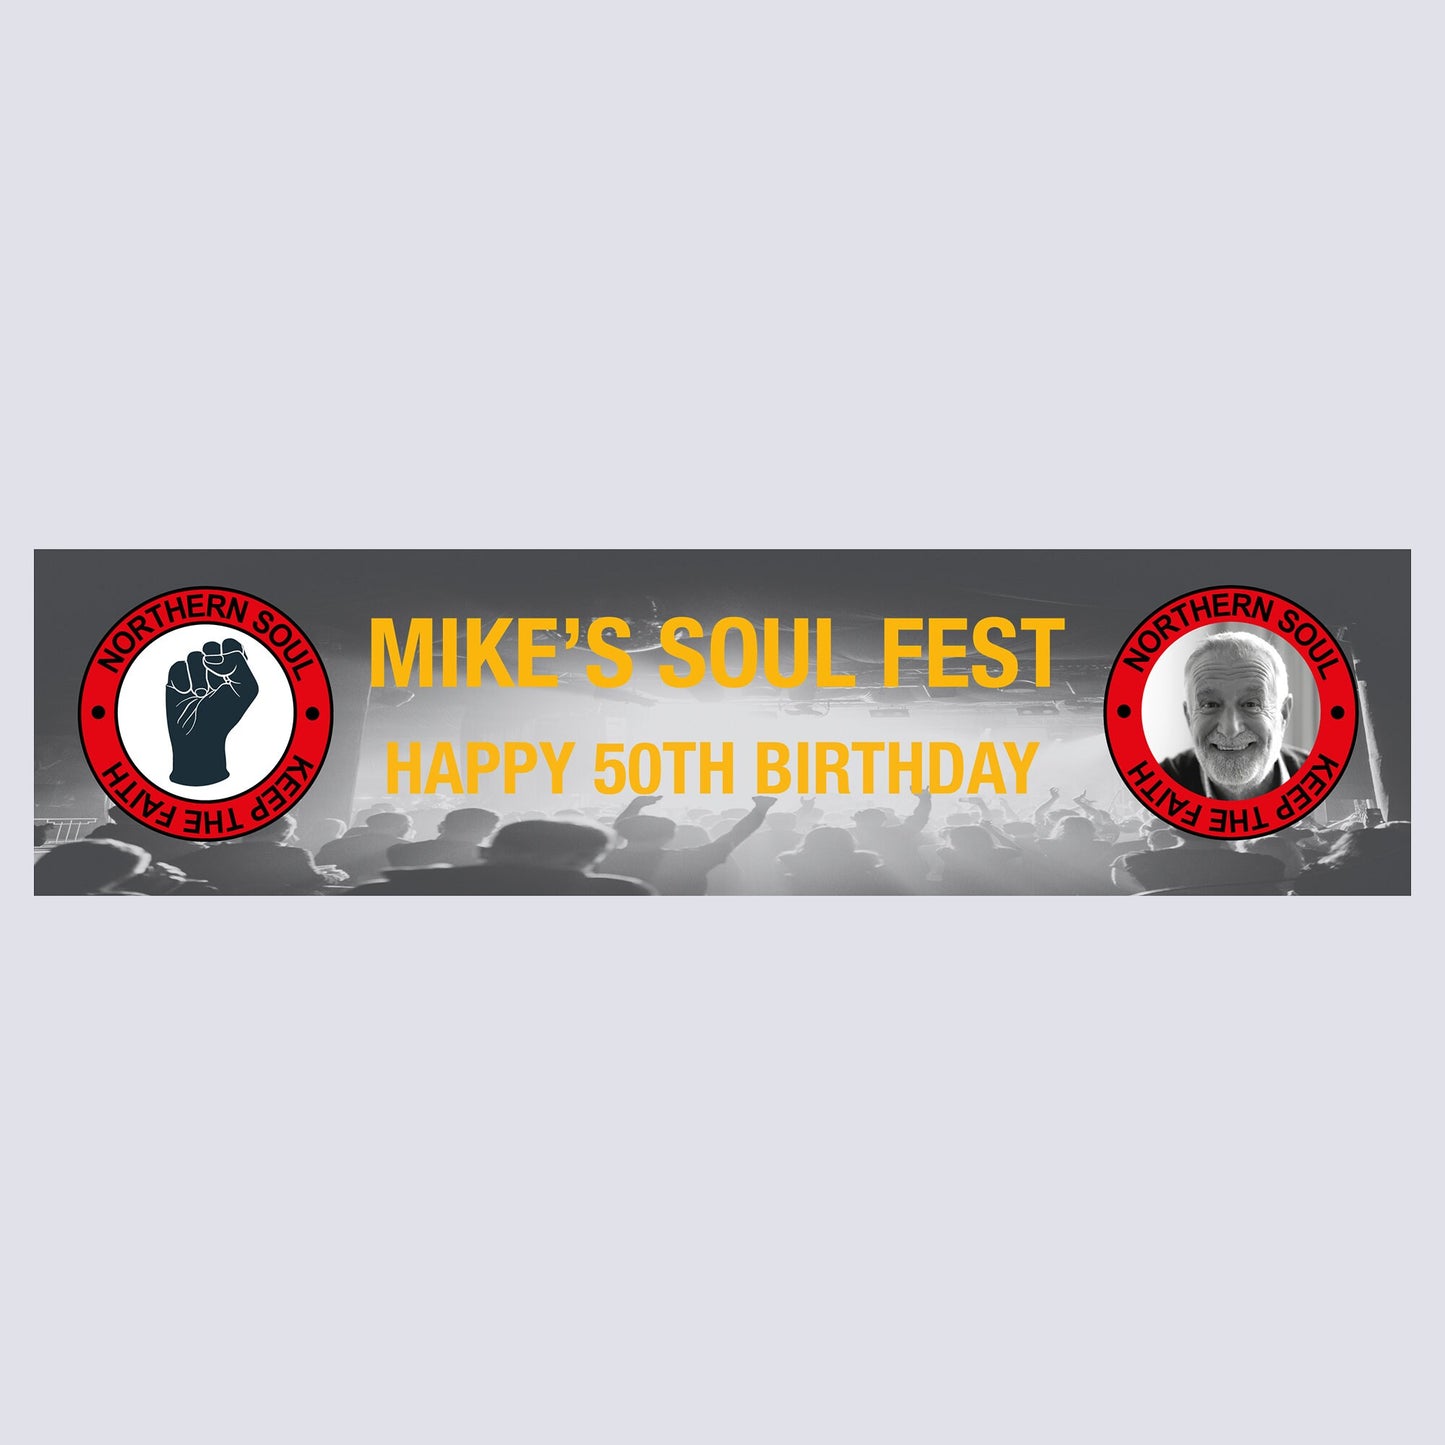 Personalised Banner - Northern Soul Banner with Photo, Northern Soul Decoration